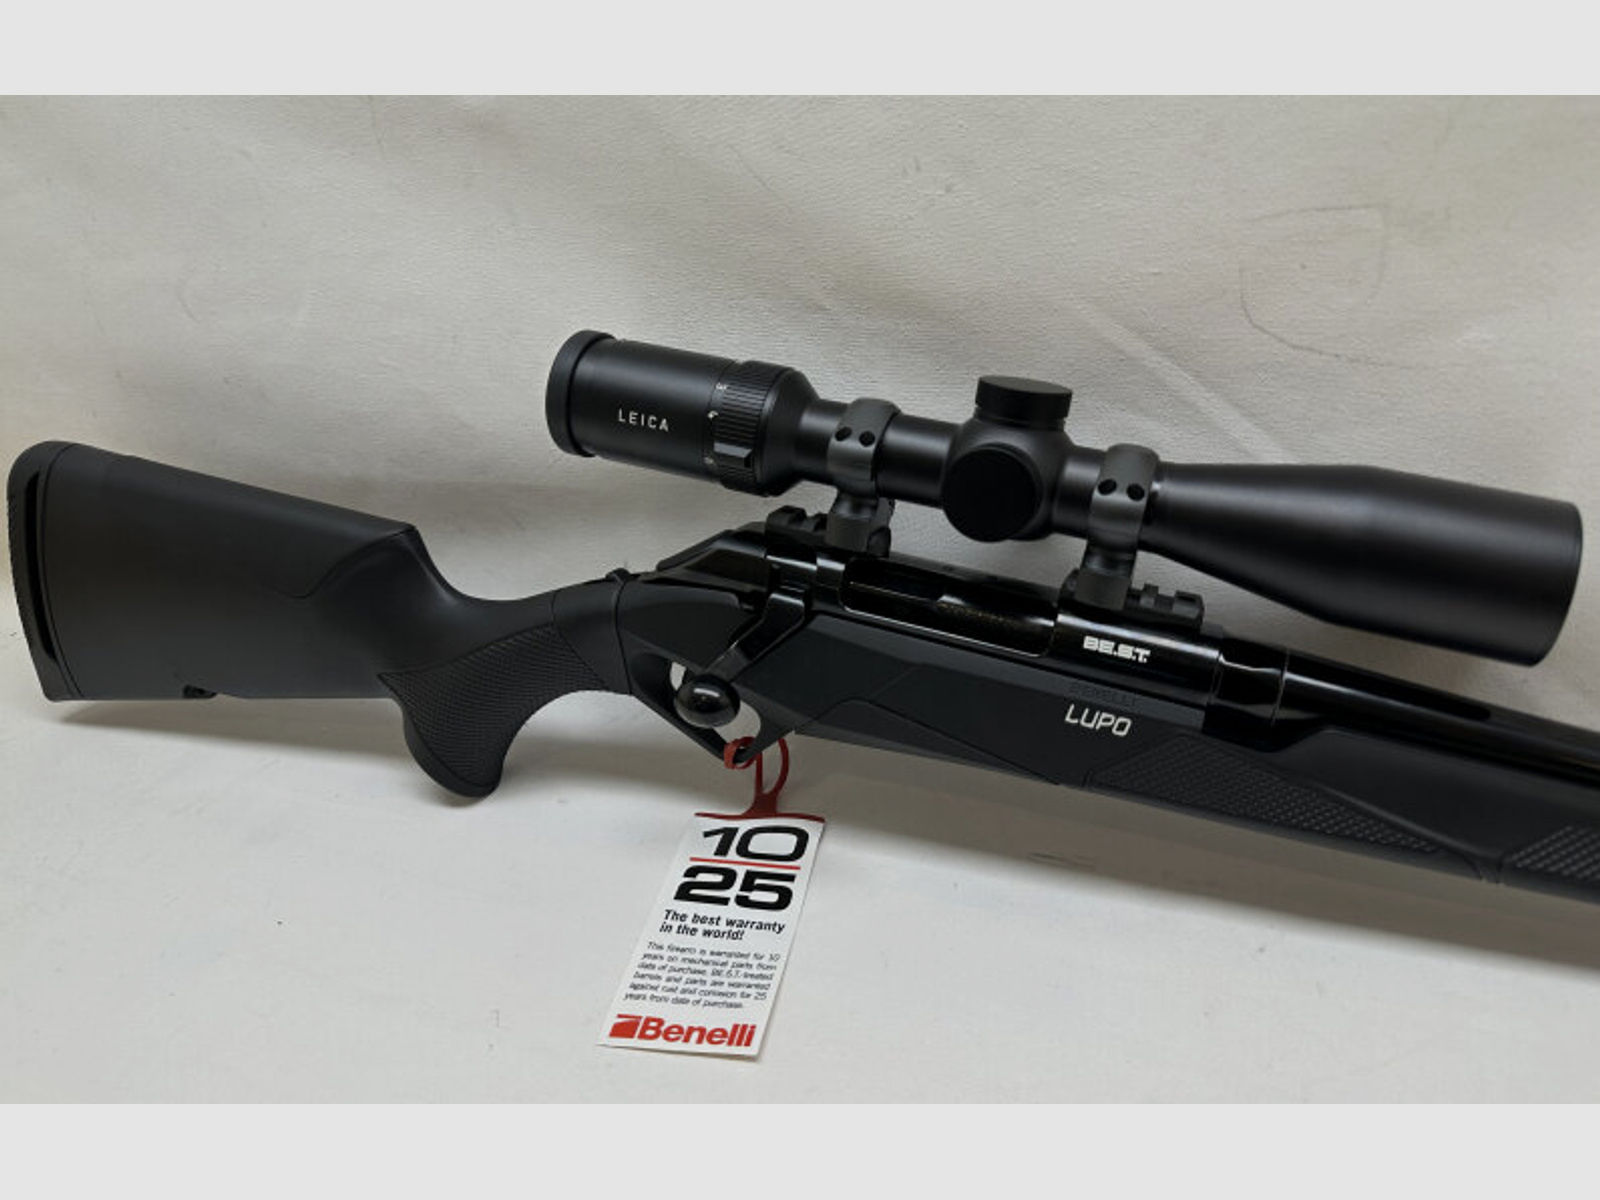 Repetierbüchse Benelli LUPO Kal. .308Win. inkl. LEICA Fortis 1,8-12x42i *NEUWAFFE*